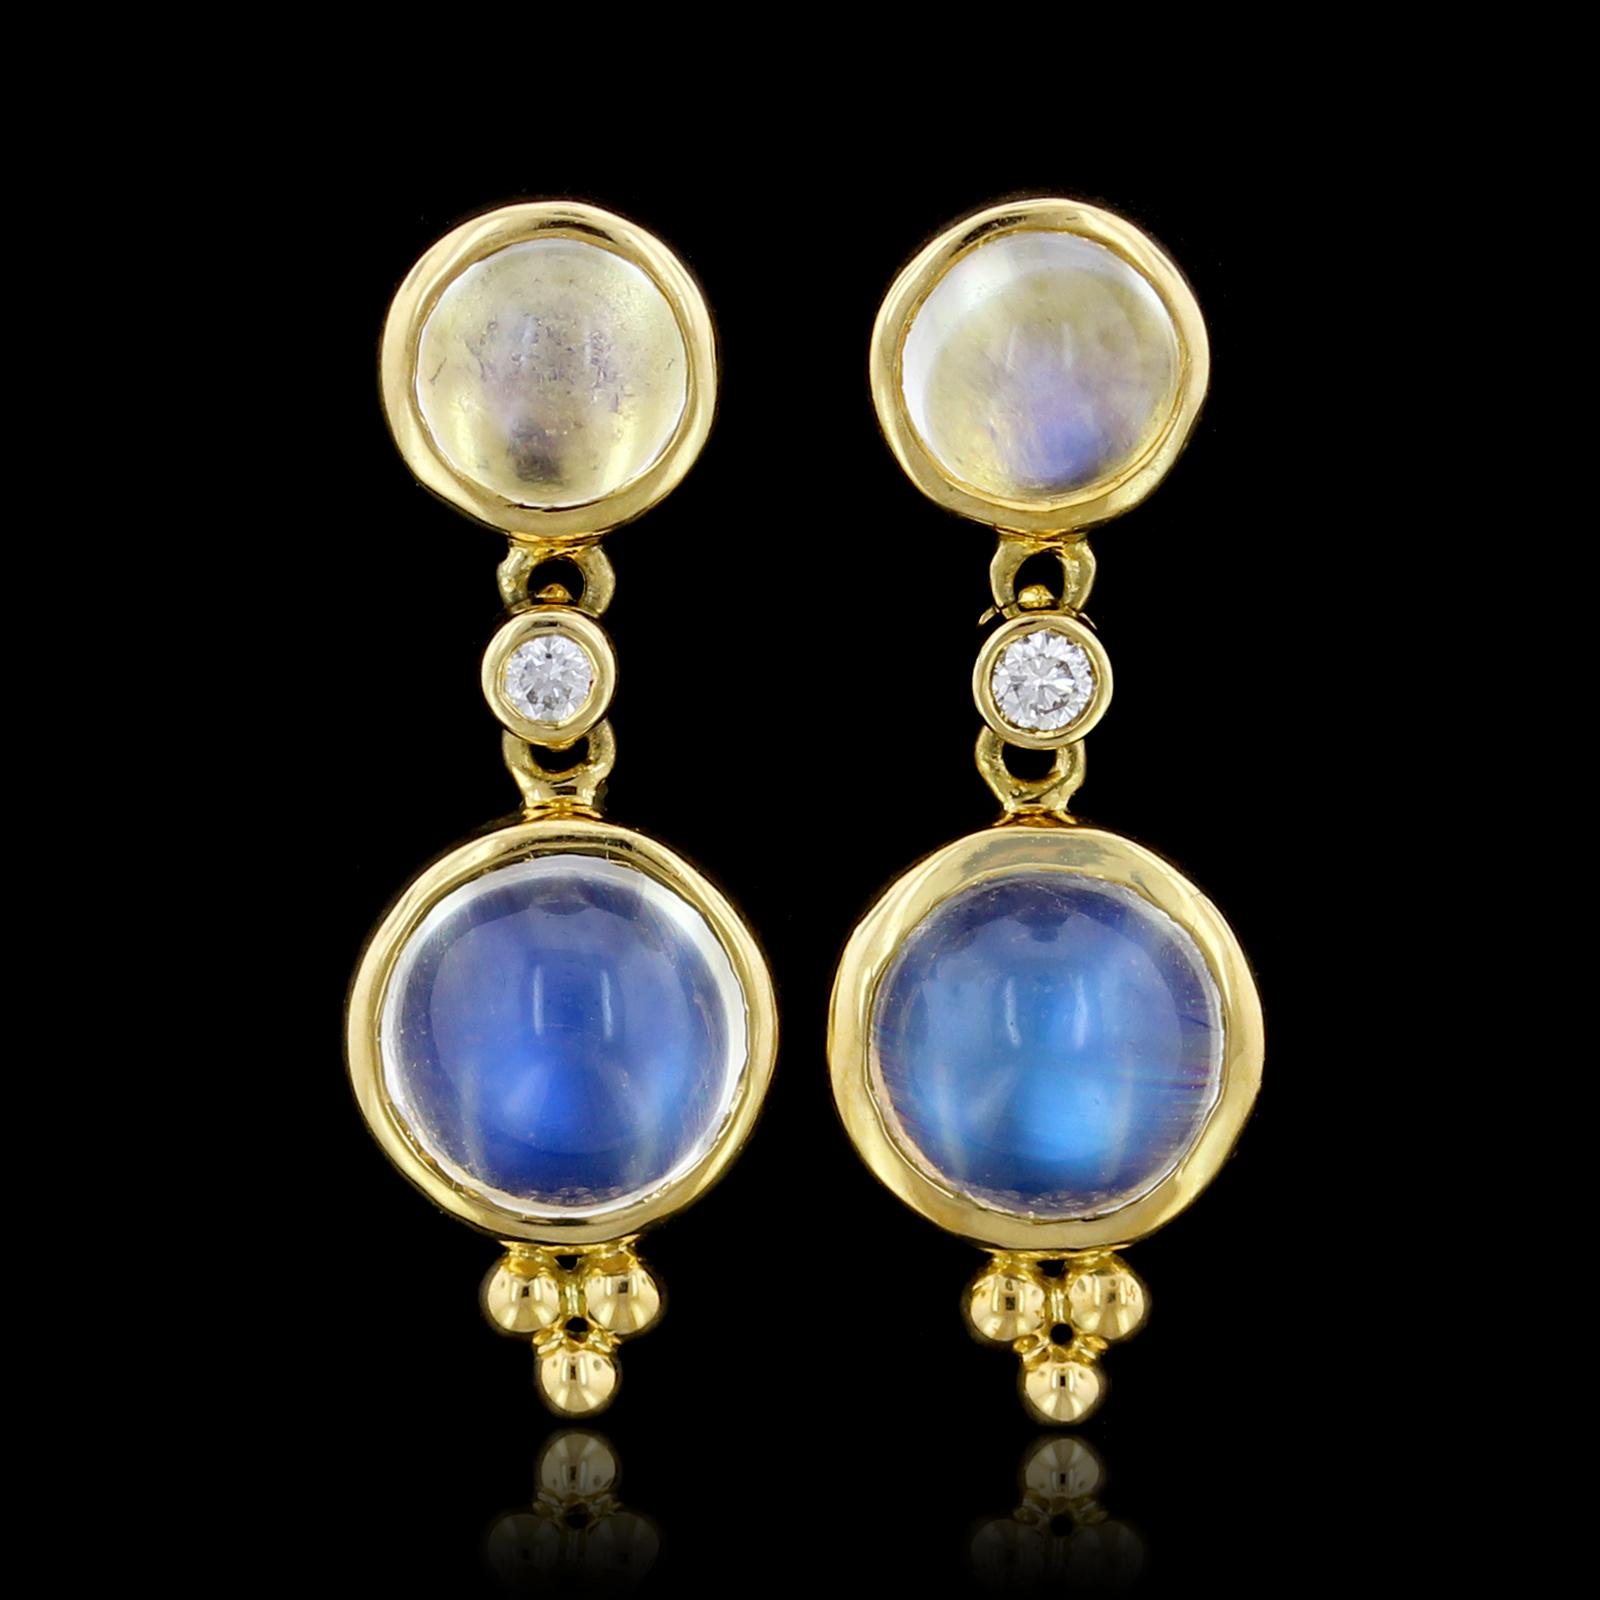 Temple St. Clair 18K Yellow Gold Royal Blue Moonstone and Diamond Earrings.
The  double drop earrings are set with four cabochon moonstones, further set with two
full cut diamonds, approx. total wt. .06cts., G color, VS clarity, length 1